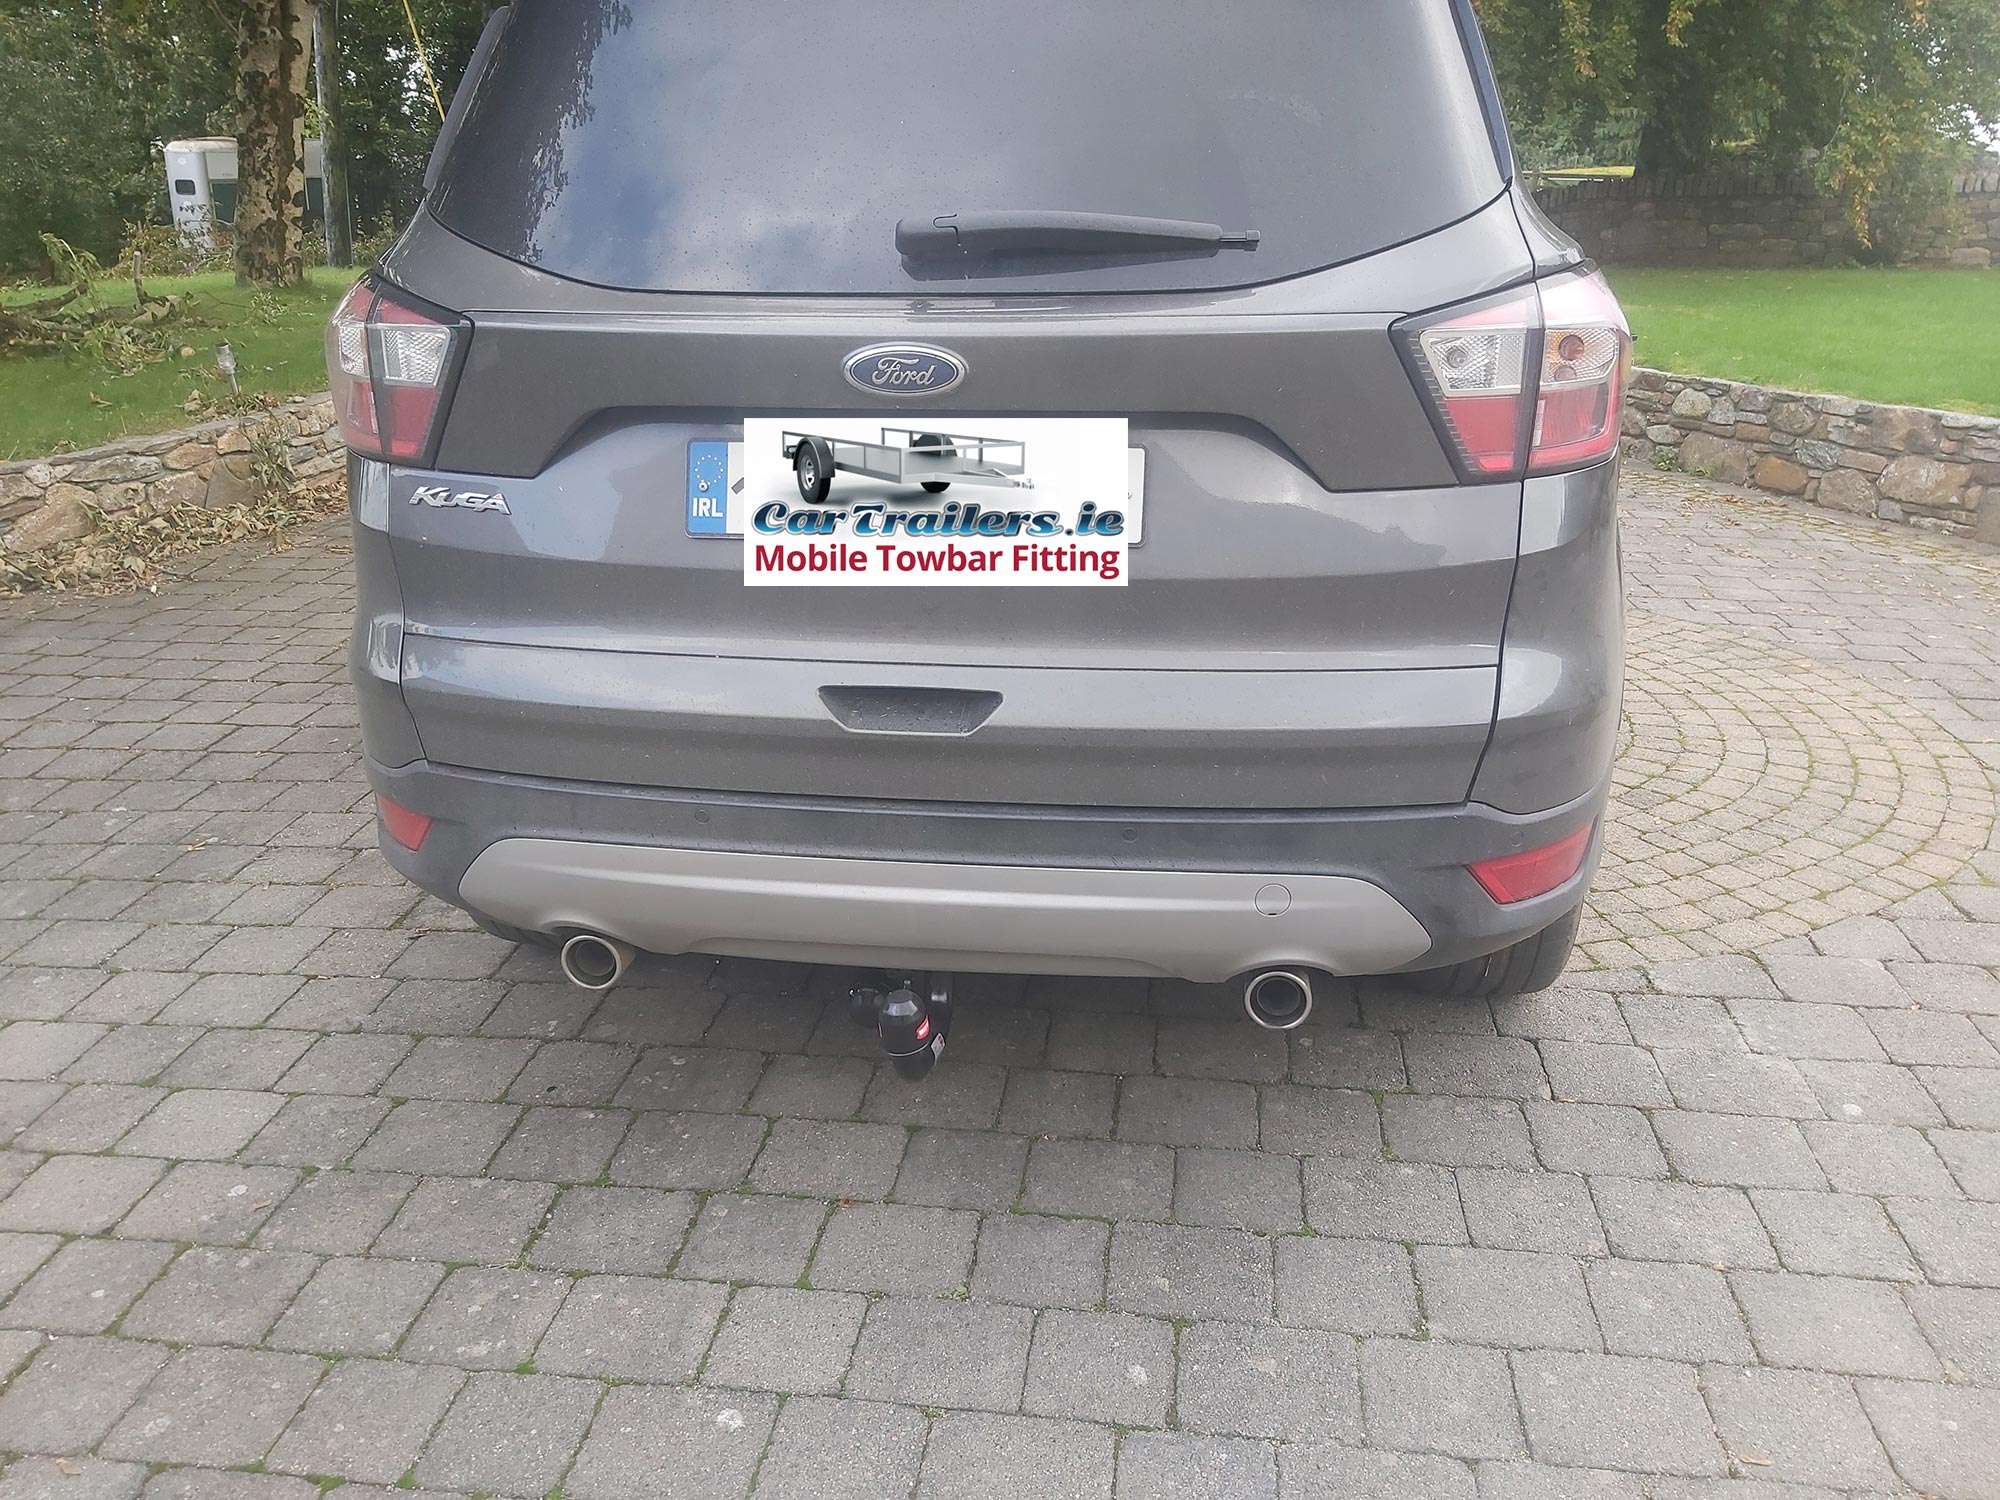 Swan Neck Towbar for a Ford Kuga - 2012 to 2020